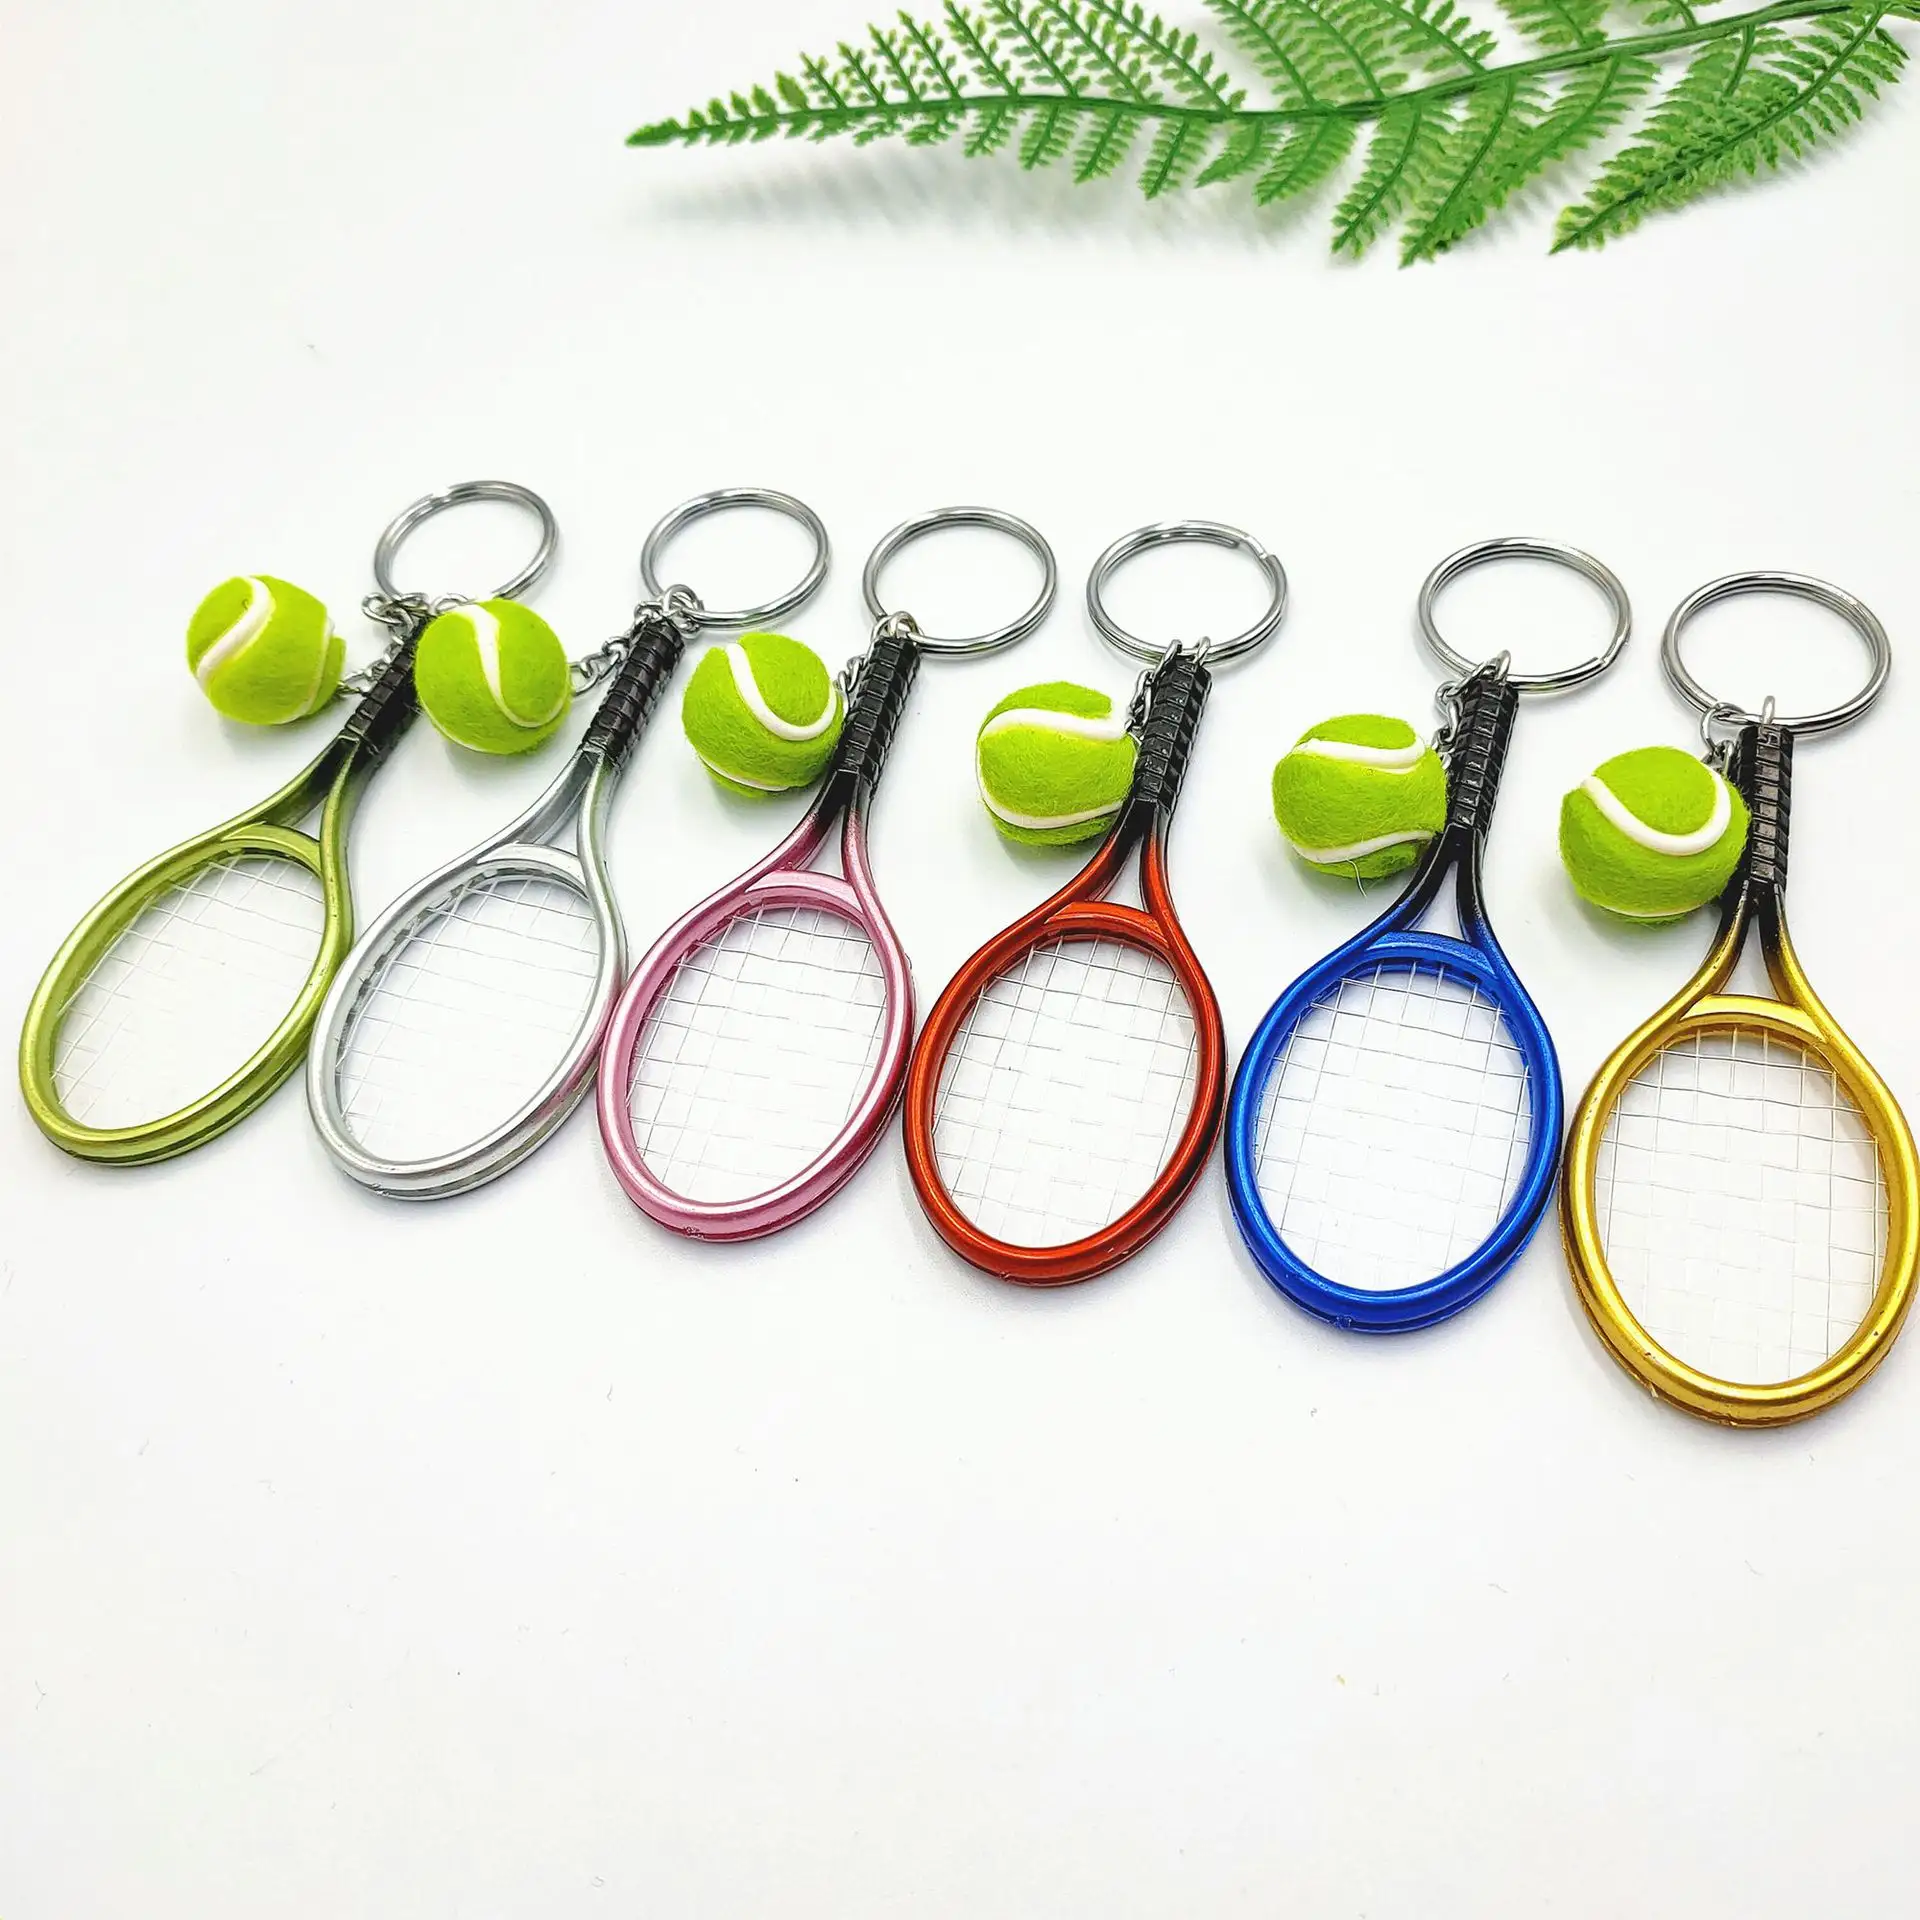 Wholesale Small Tennis Ball Keychains Creative Tennis Keychain Promotional Gift Pendant Bag Key Ring